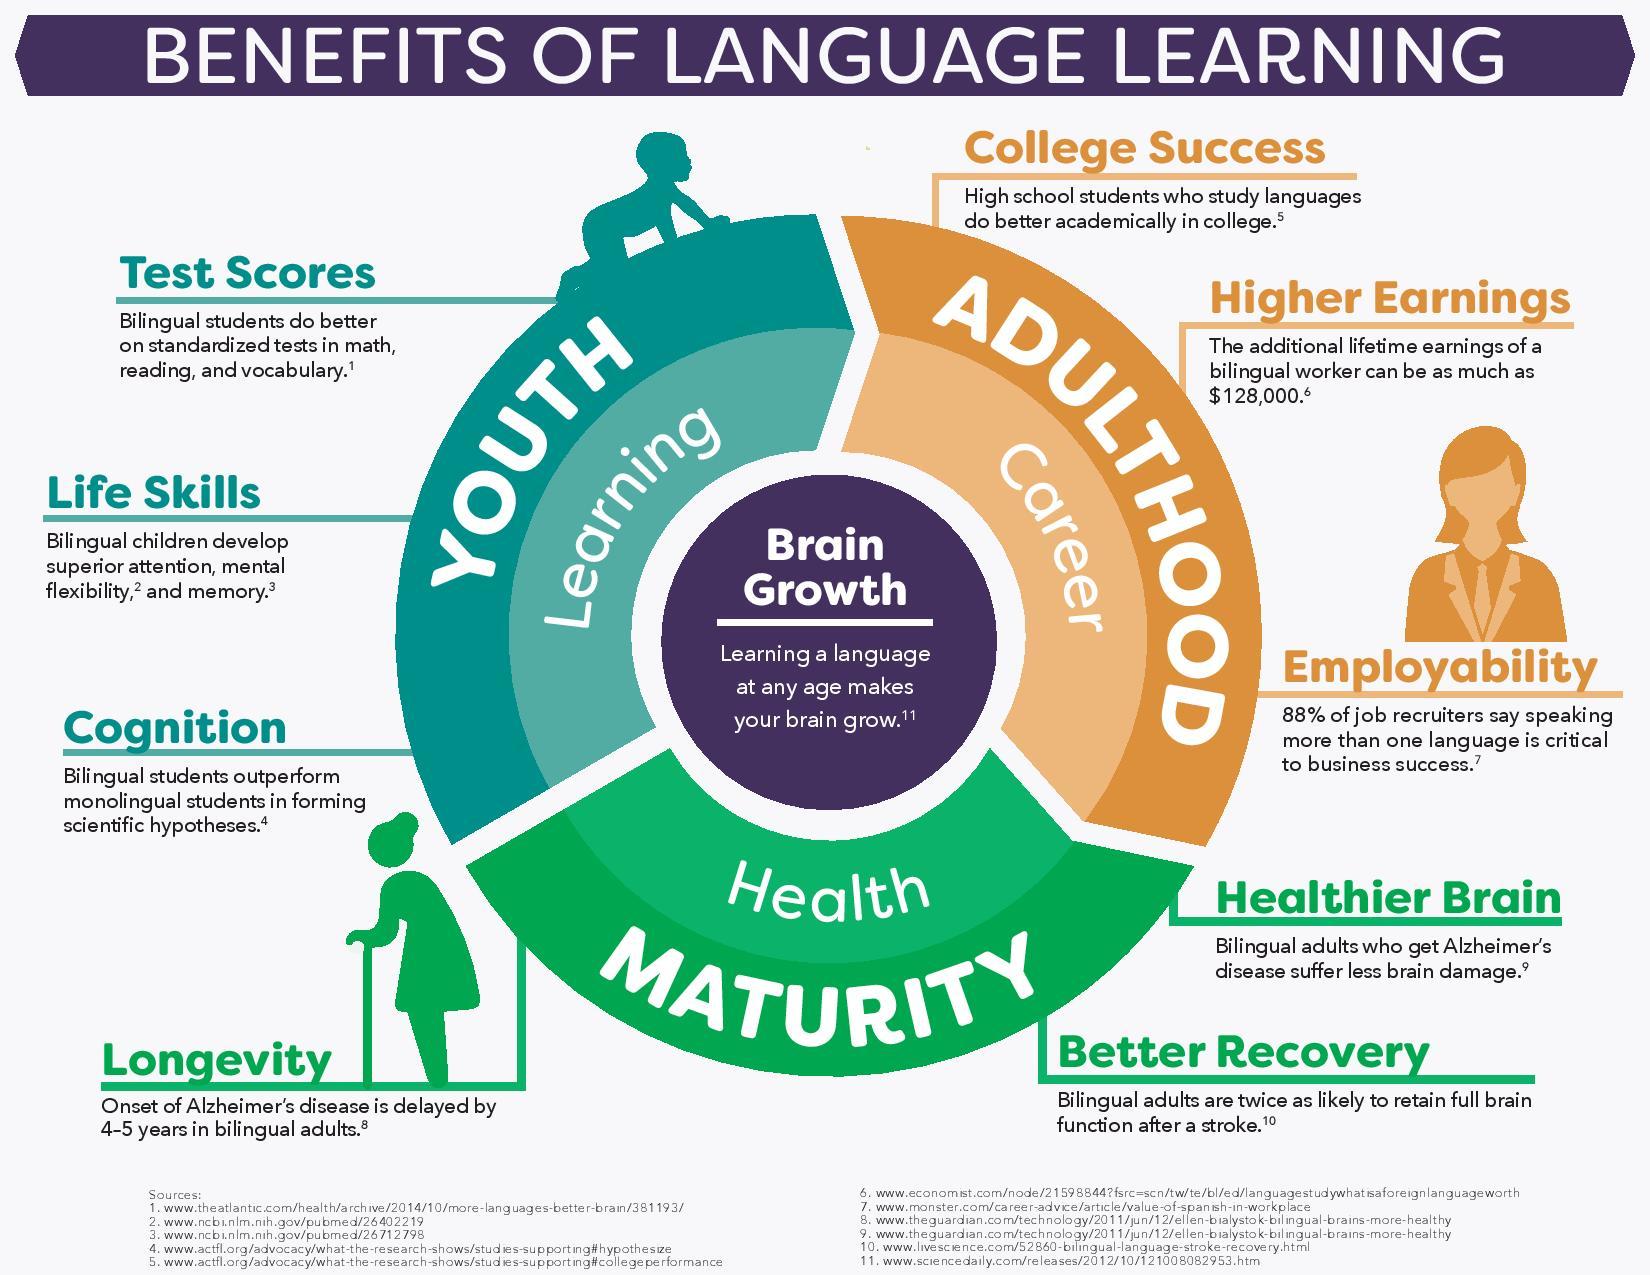 Benefits of Language Learning Infographic